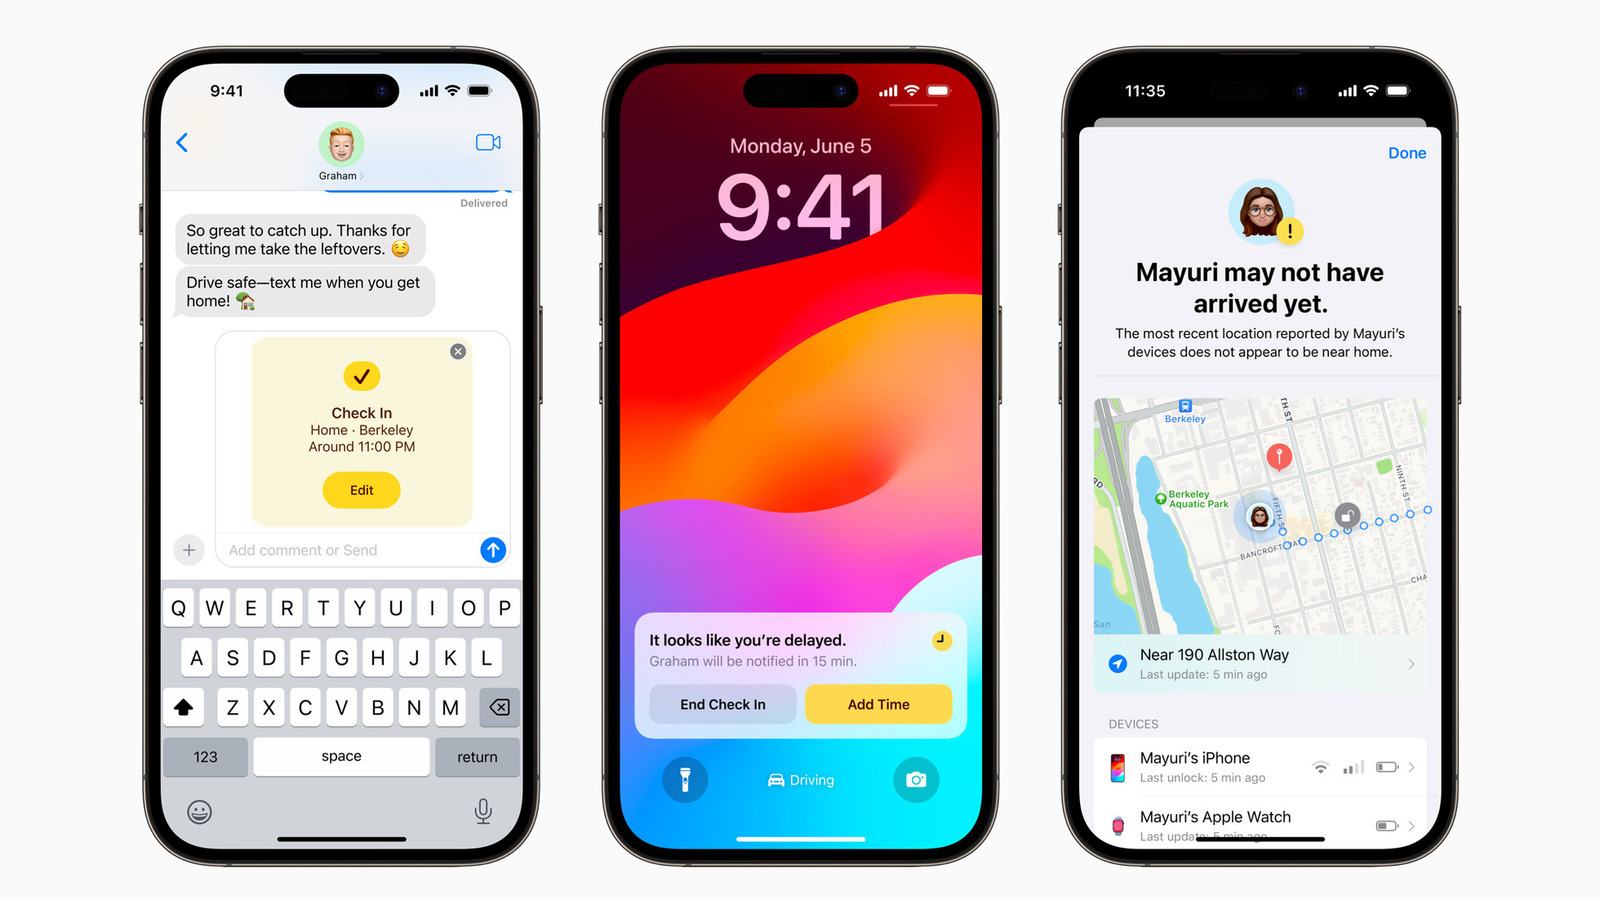 How To Use The Check In Feature On iPhone To Make Sure Your Friends And Family Get Home Safe – SlashGear